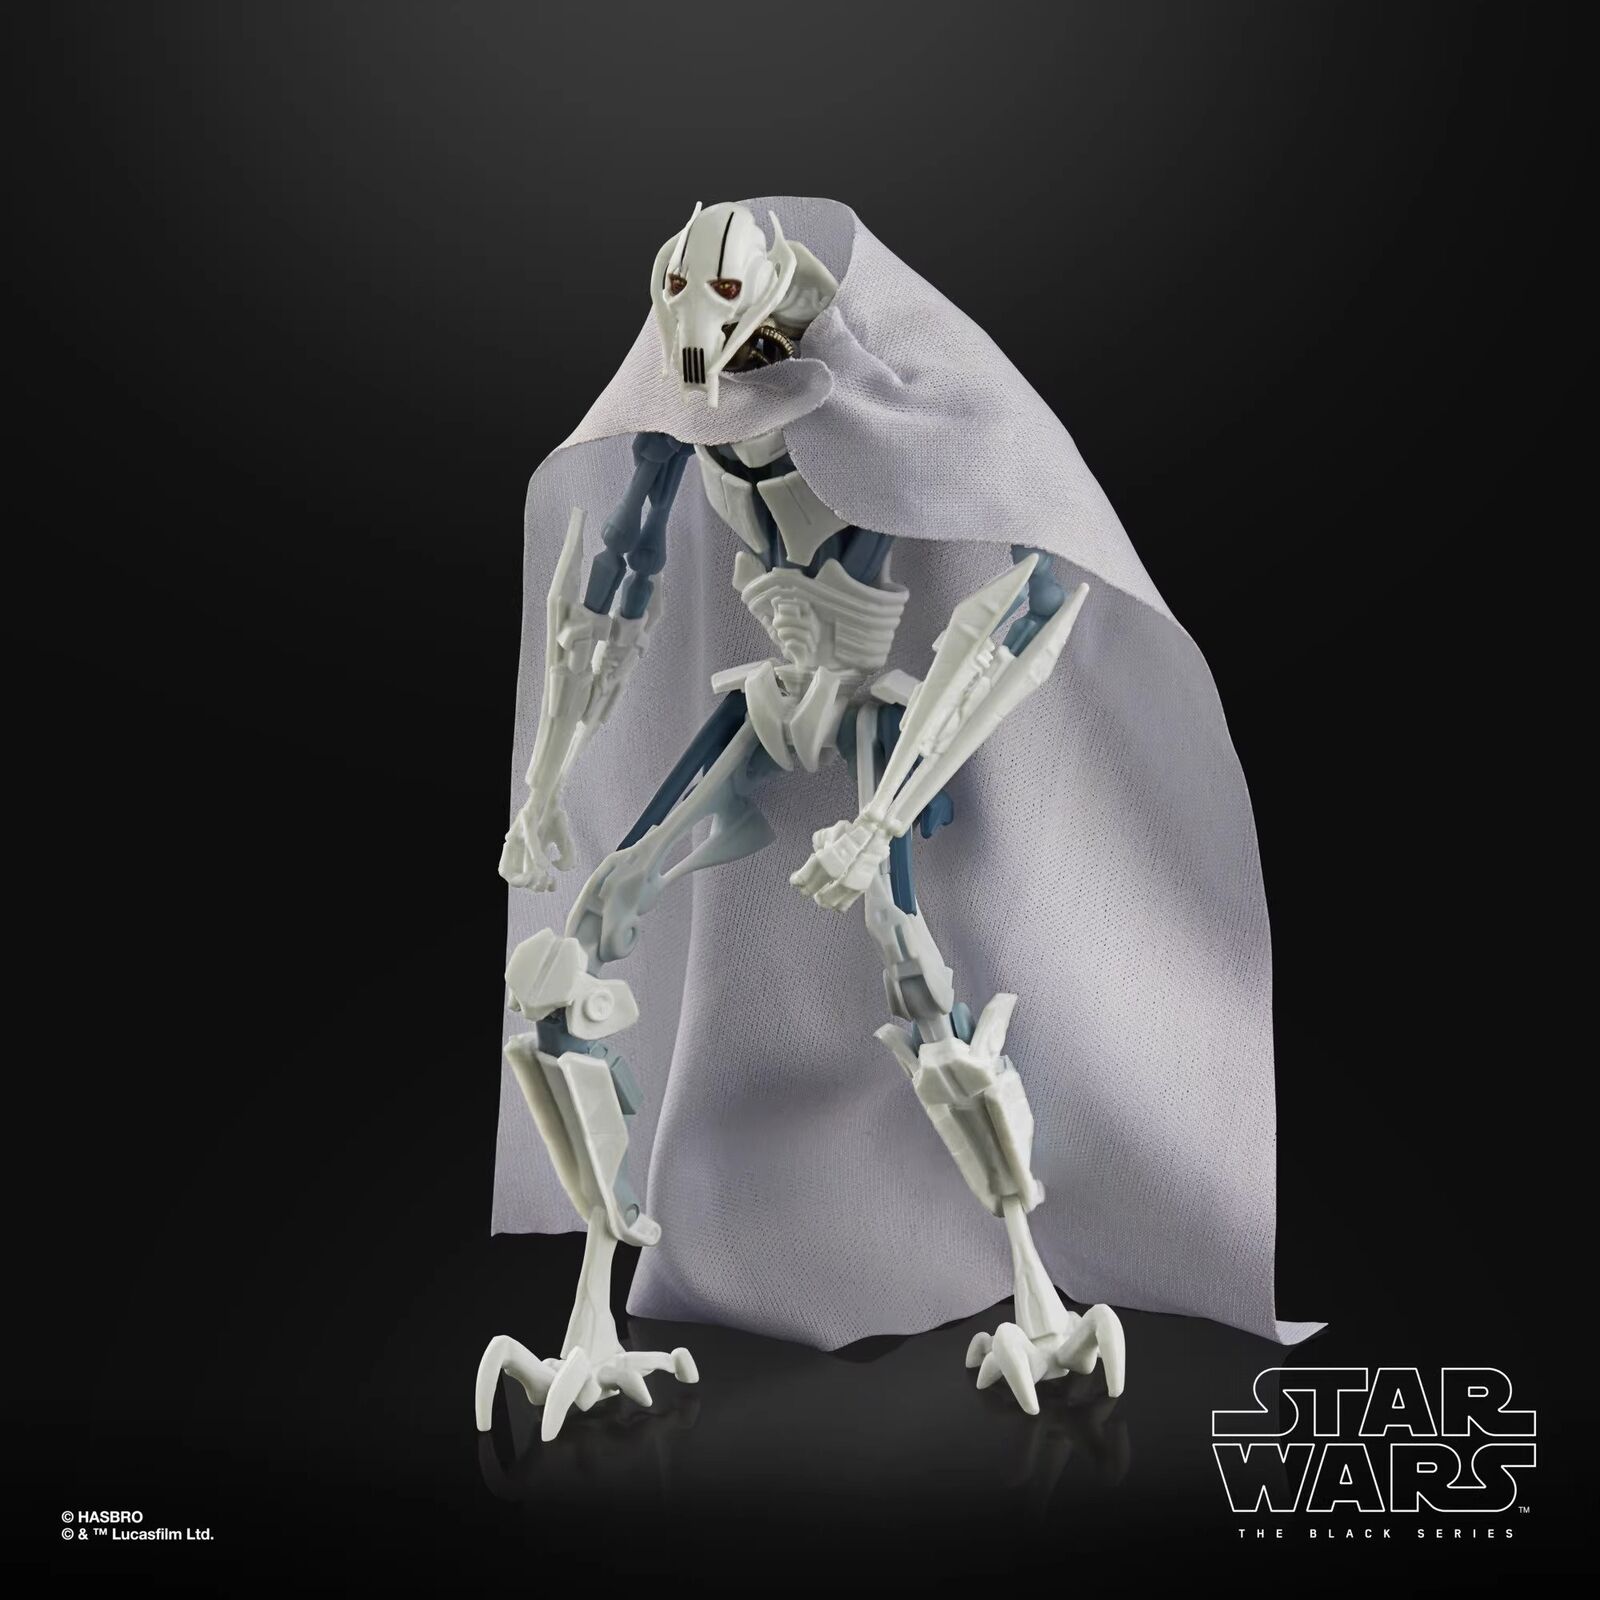 Star Wars 50th Anniversary General Grievous 6 inches Collectible Figure Copy